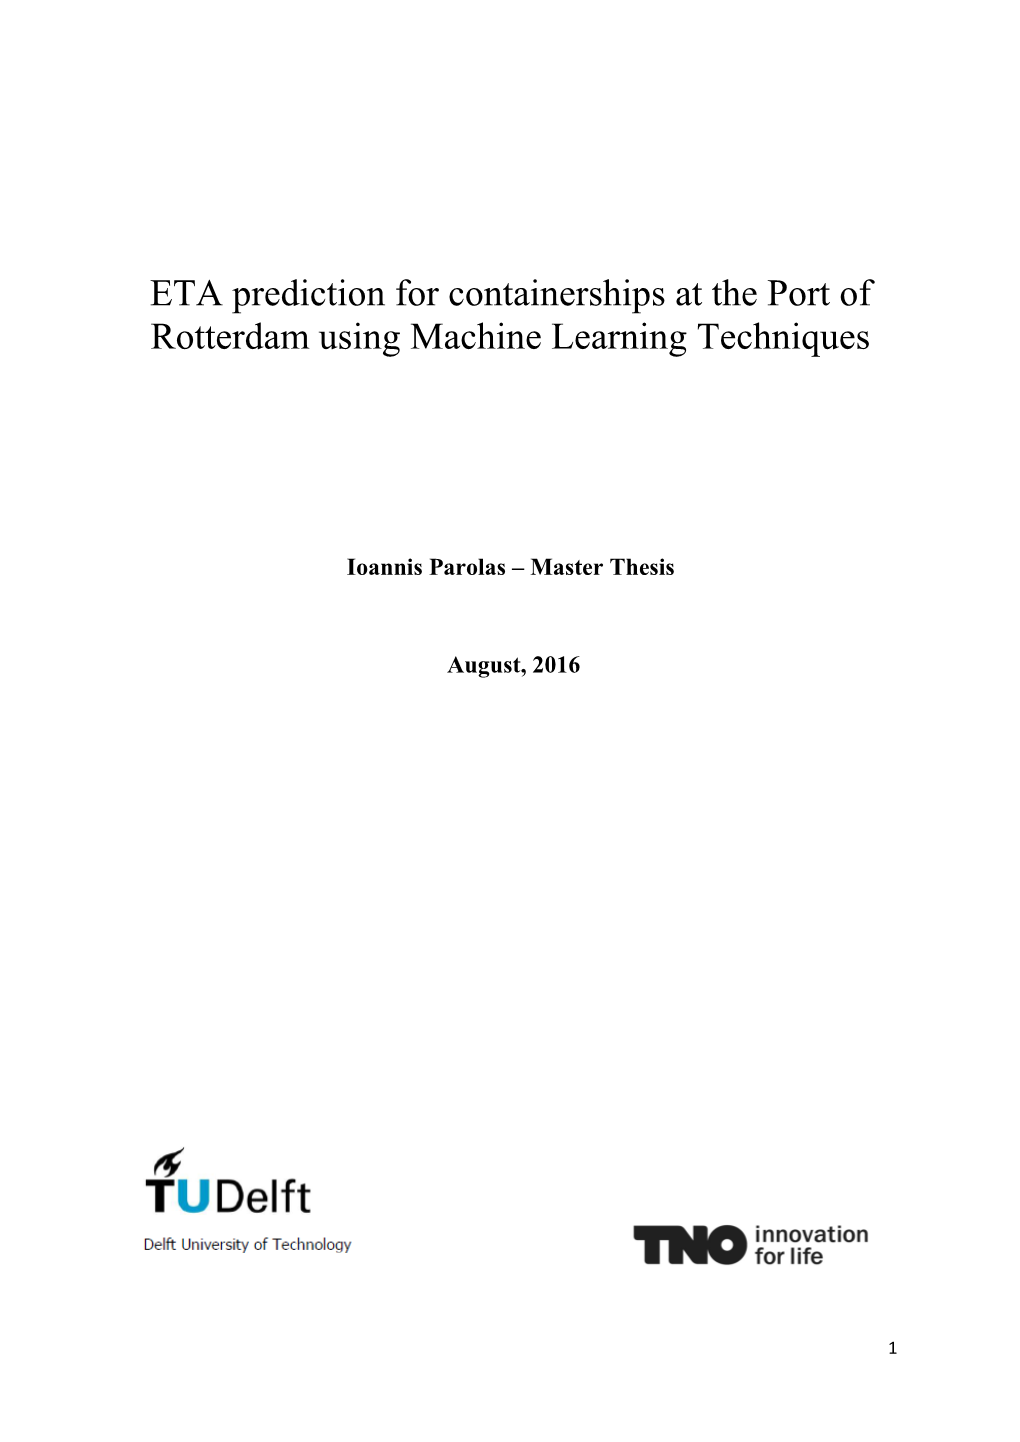 ETA Prediction for Containerships at the Port of Rotterdam Using Machine Learning Techniques